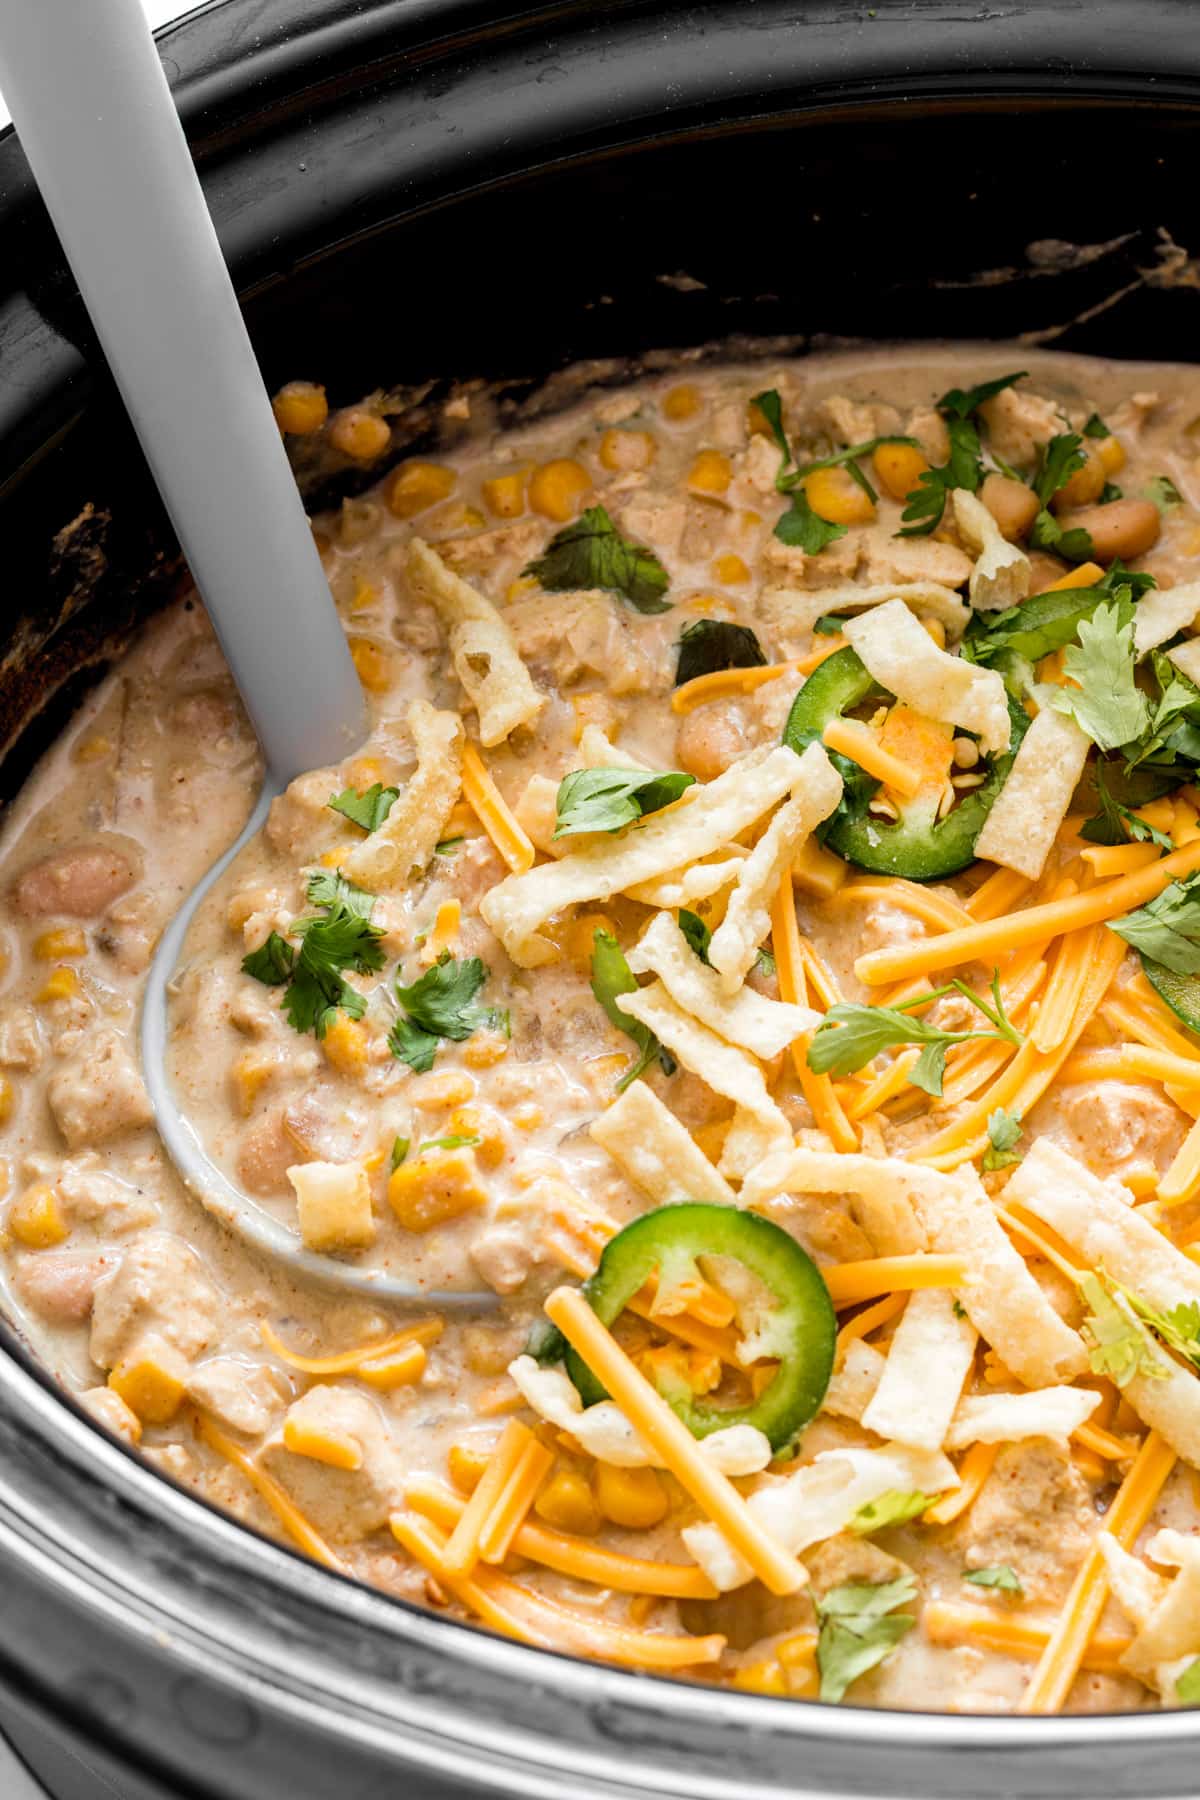 Ladle full of white chicken chili after cooking topped with garnishes.